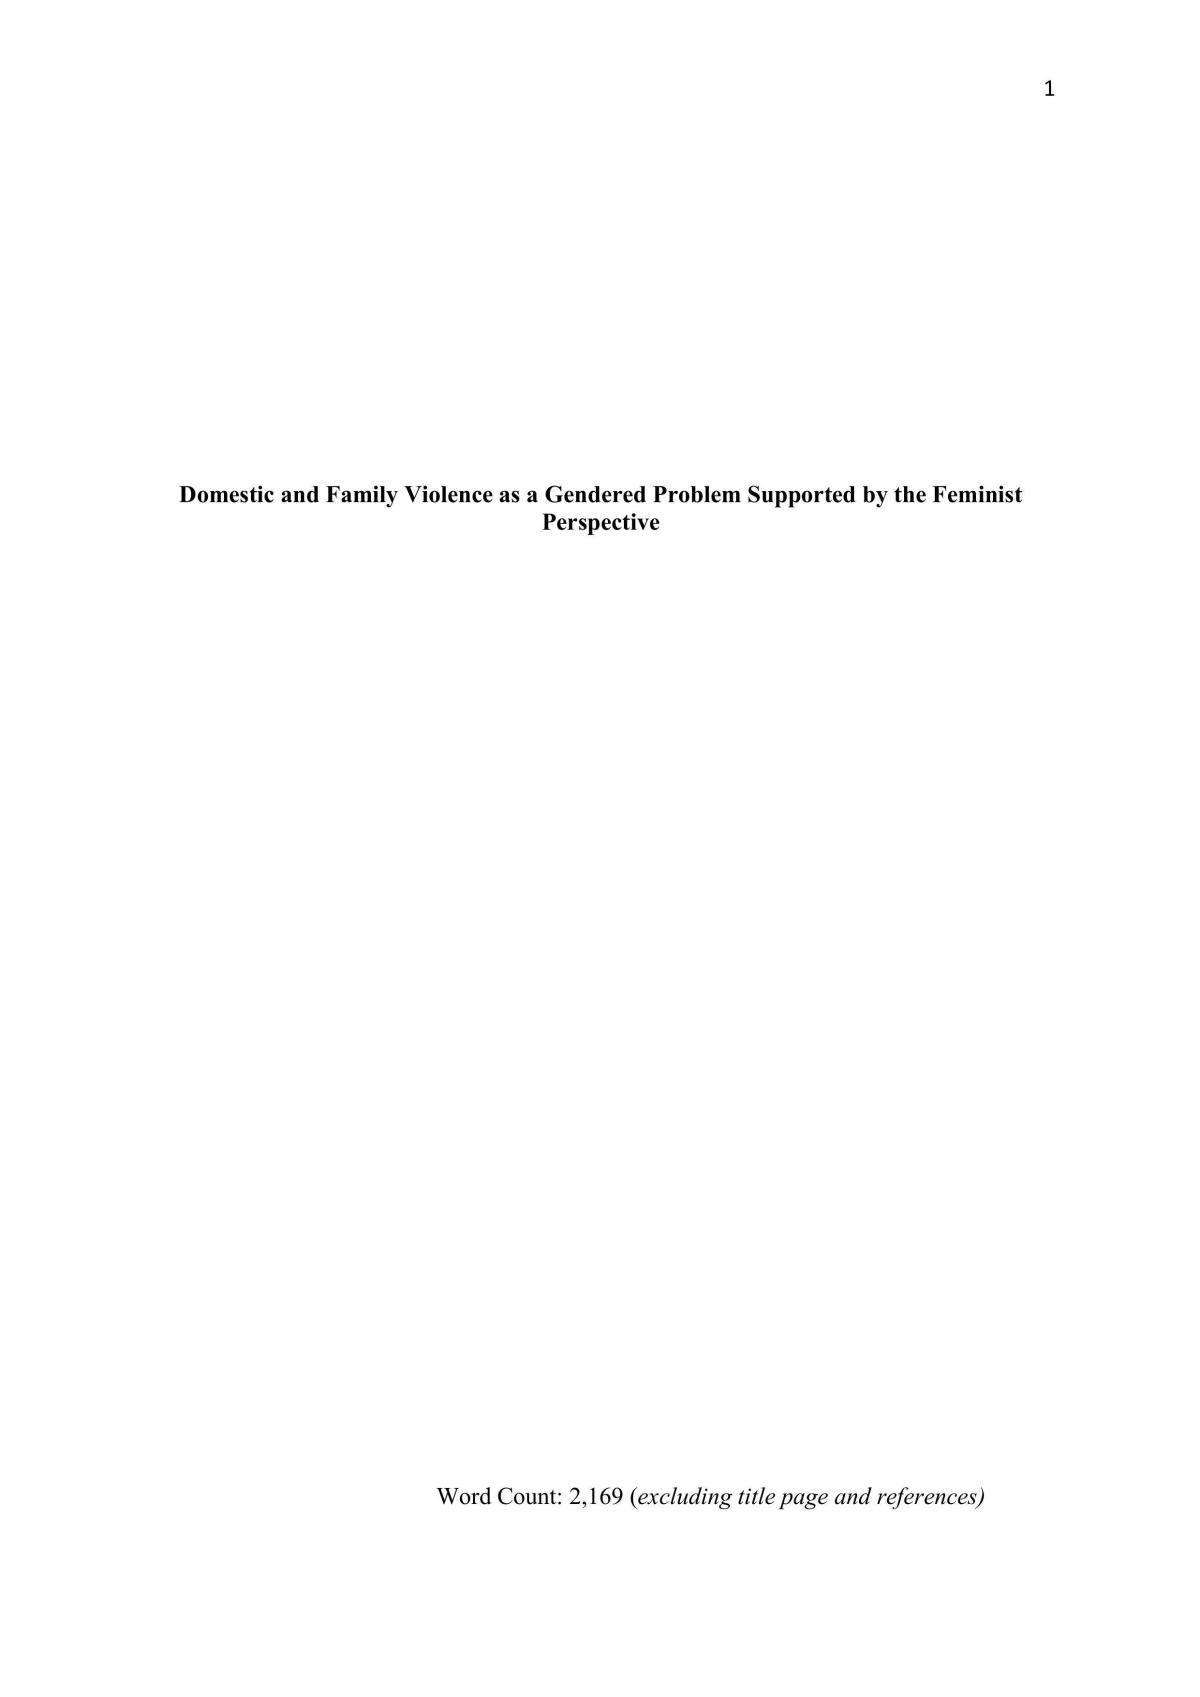 Research Essay - Domestic Violence and the feminist perspective  - Page 1